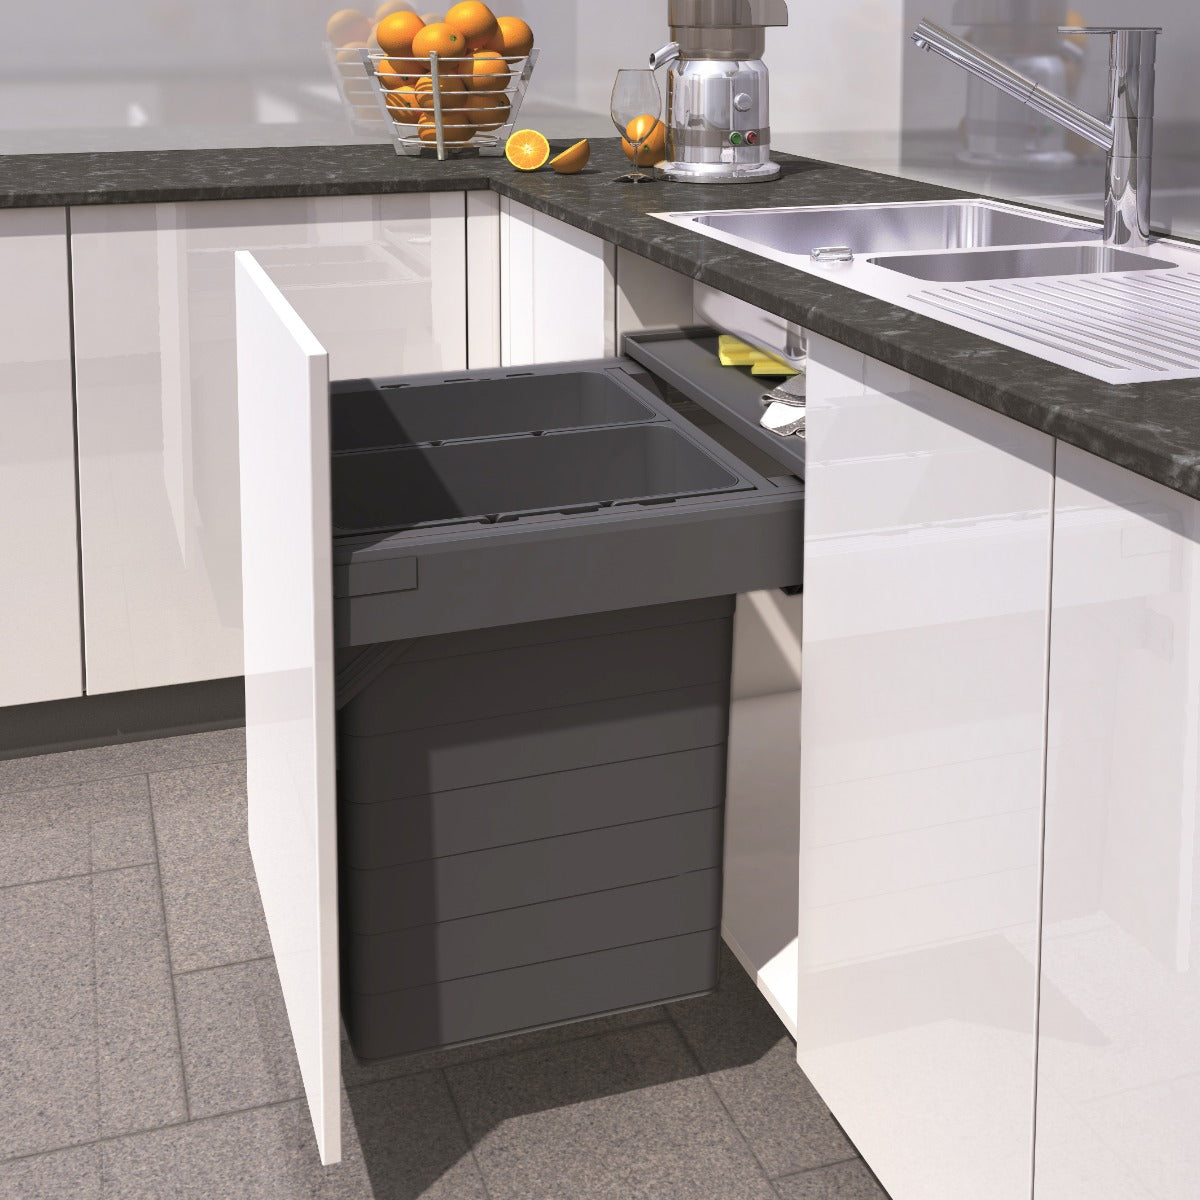 Ninka One2Five Two Compartment 84L integrated kitchen recycling bin, designed for easy waste & recycling separation in 600mm wide cabinets.